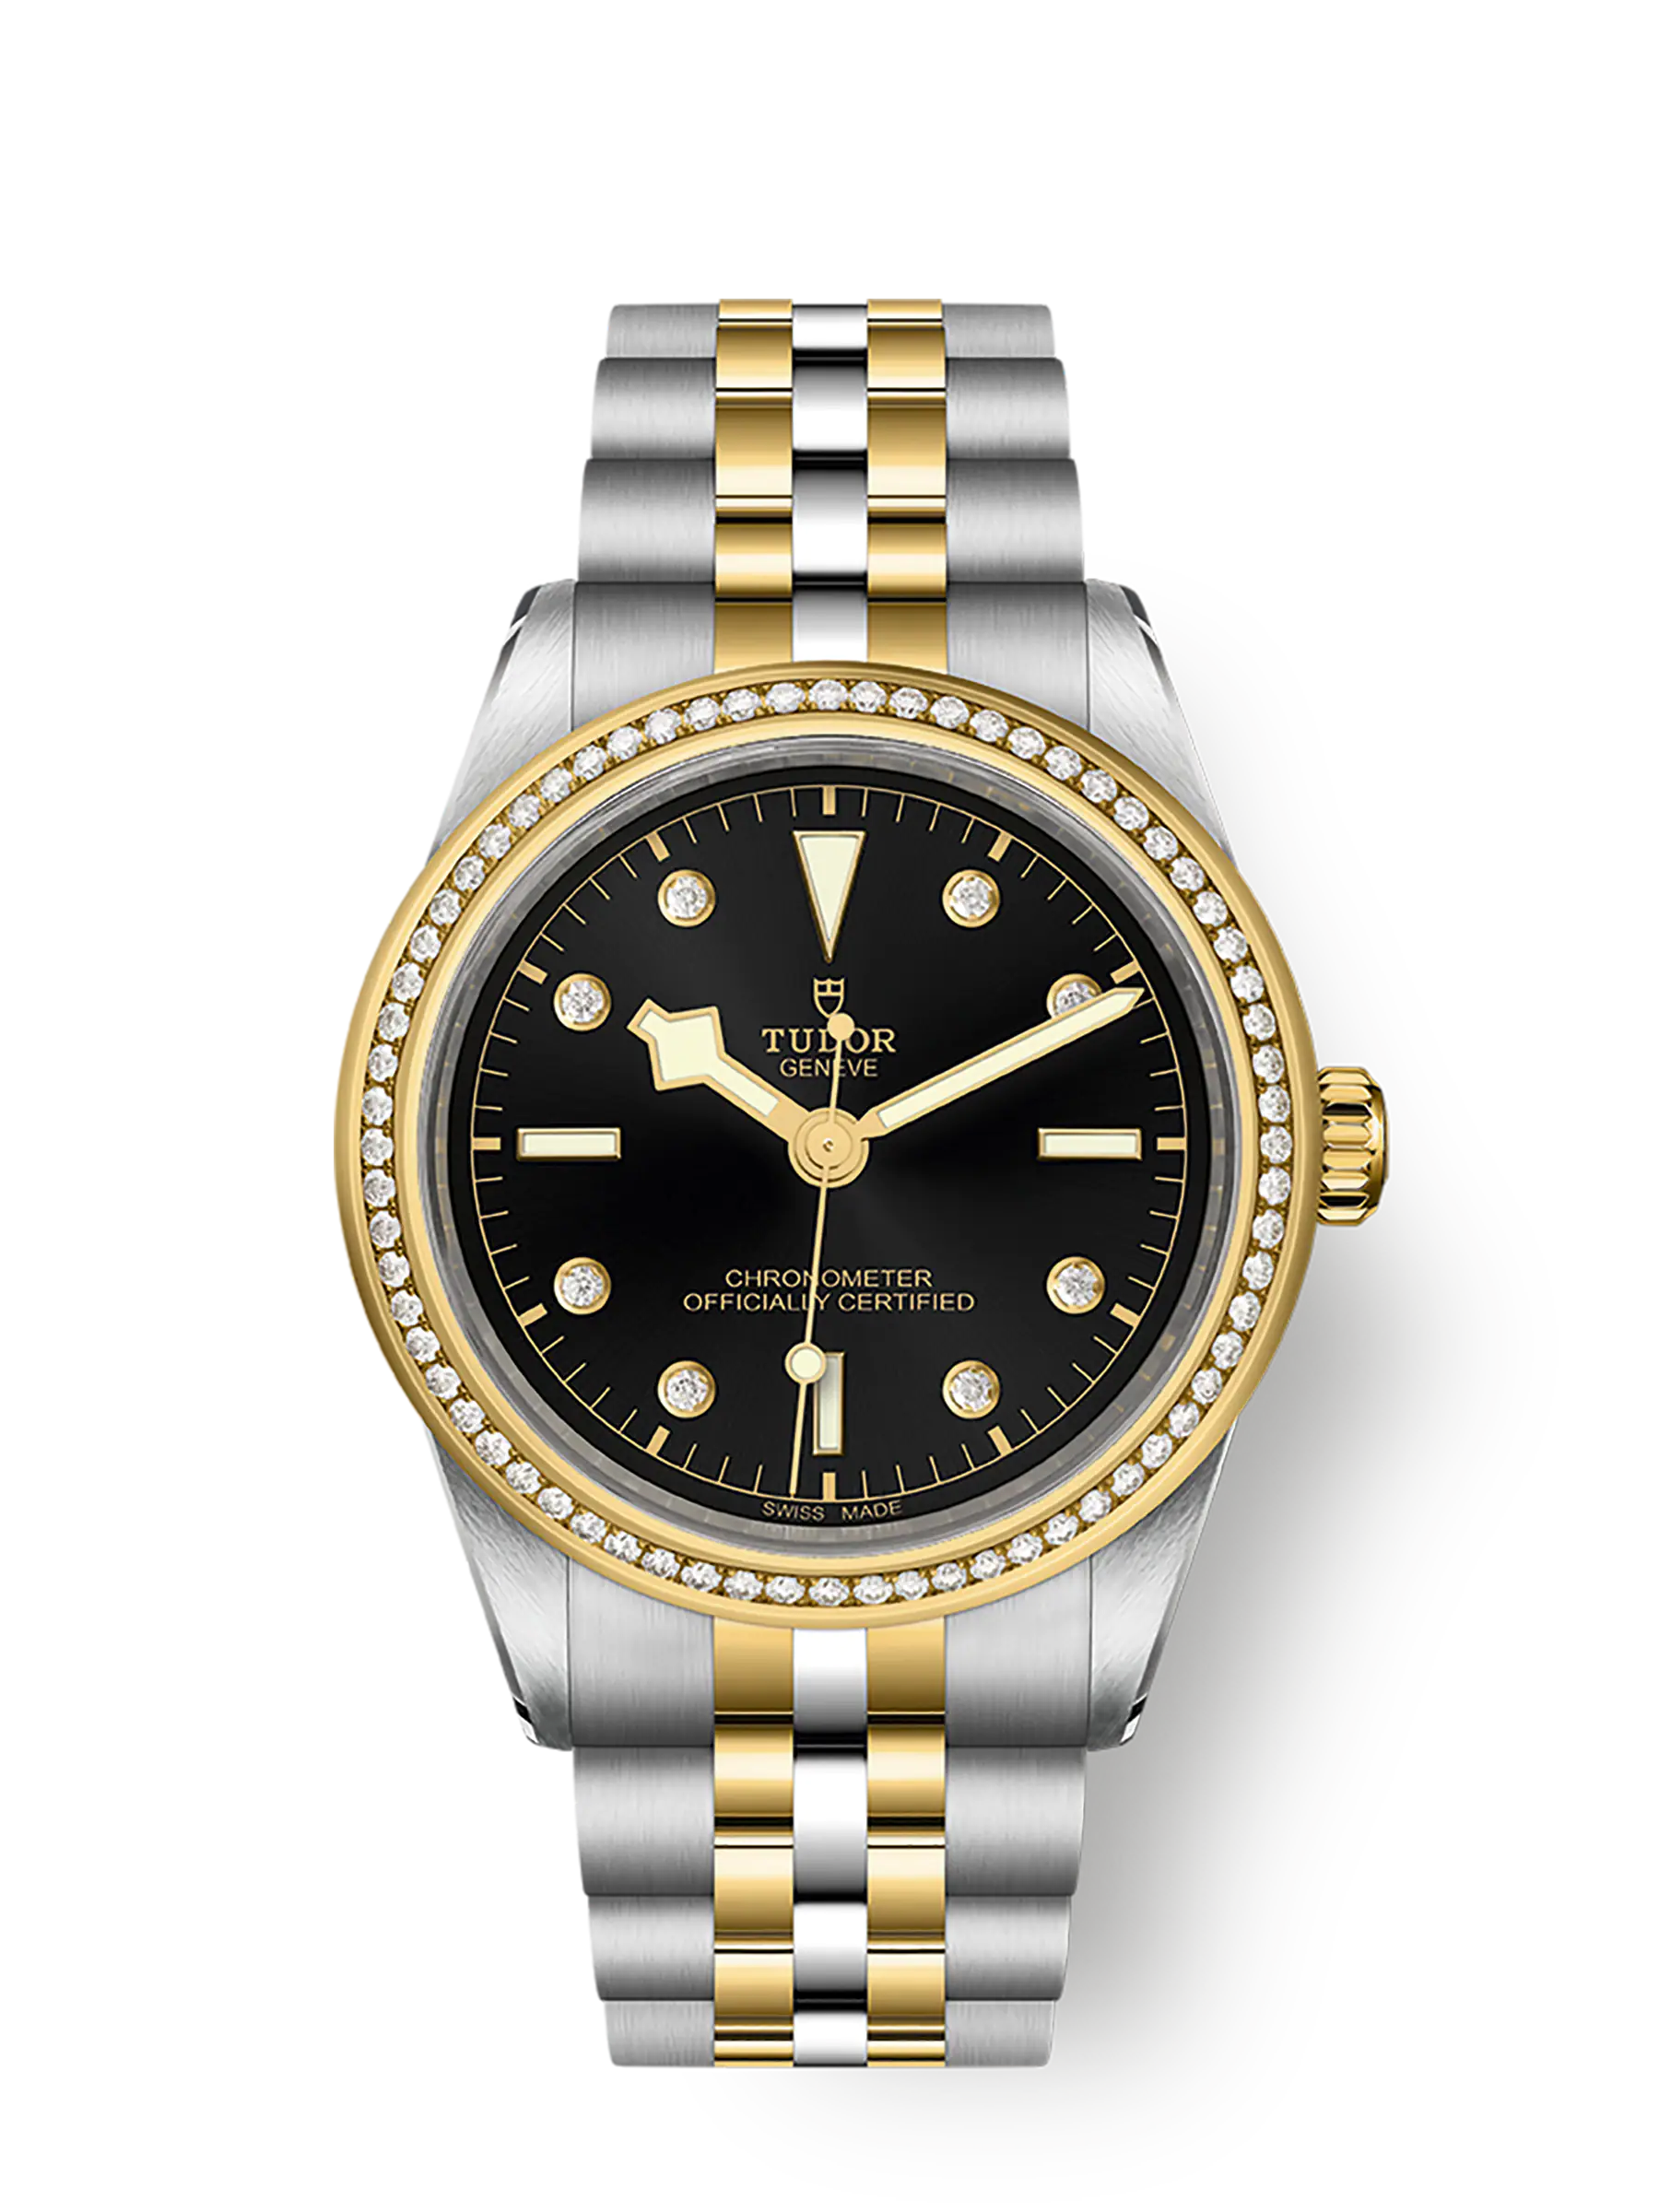 Tudor Black Bay 39 S&G, 316L Stainless Steel, 18k Yellow Gold and Diamonds, Ref# M79673-0005